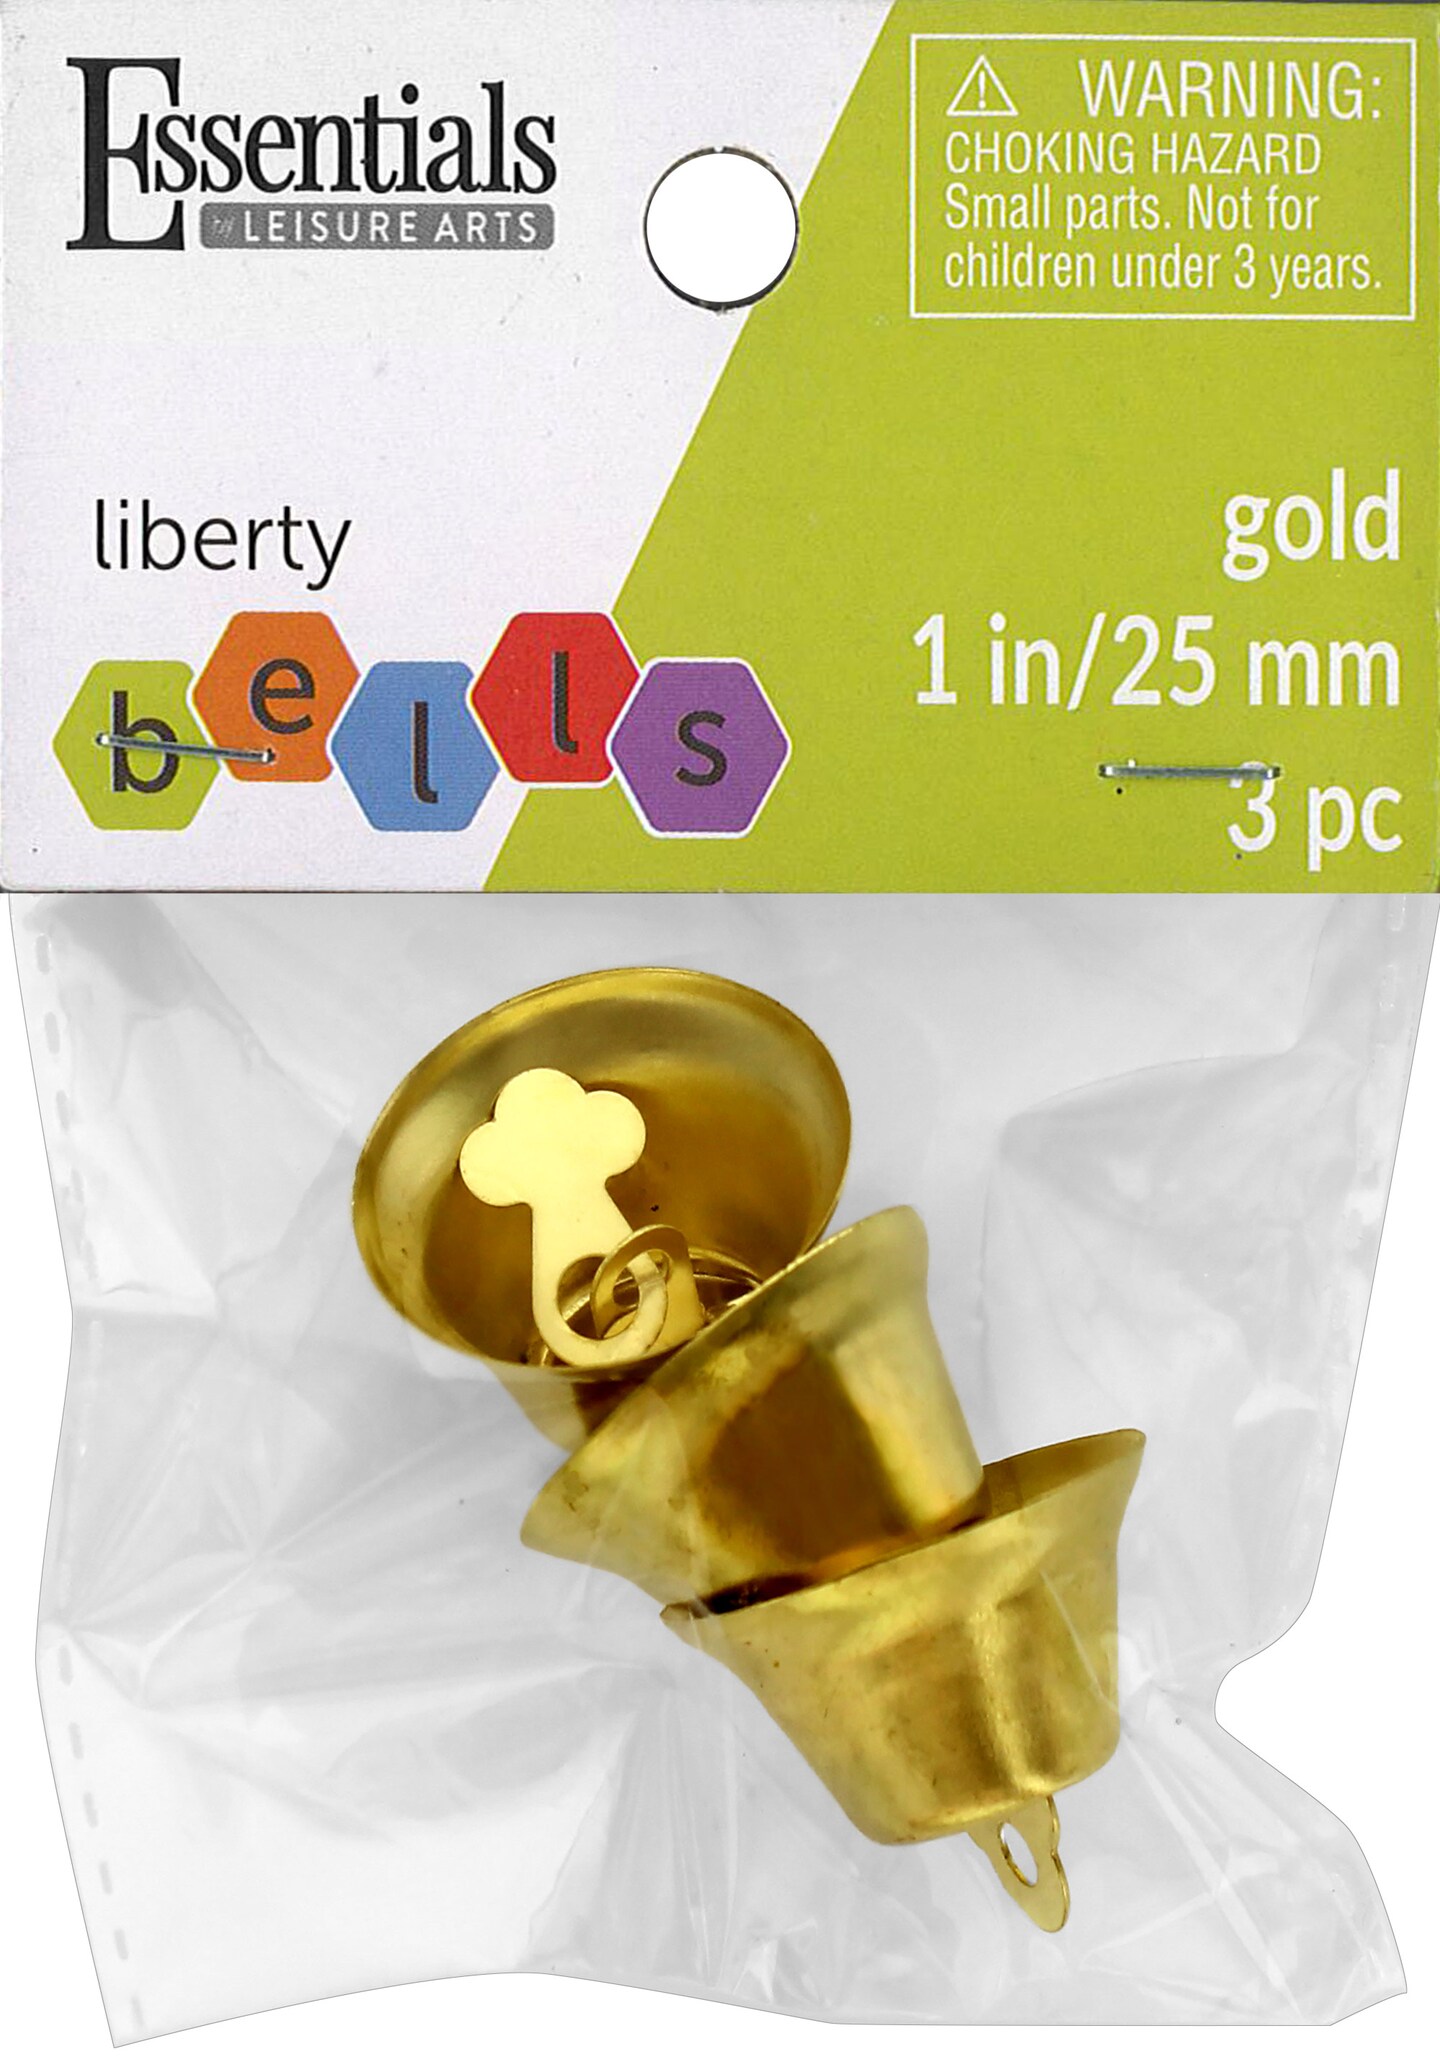 Essentials By Leisure Arts Arts Liberty Bells 25mm Gold 3pc